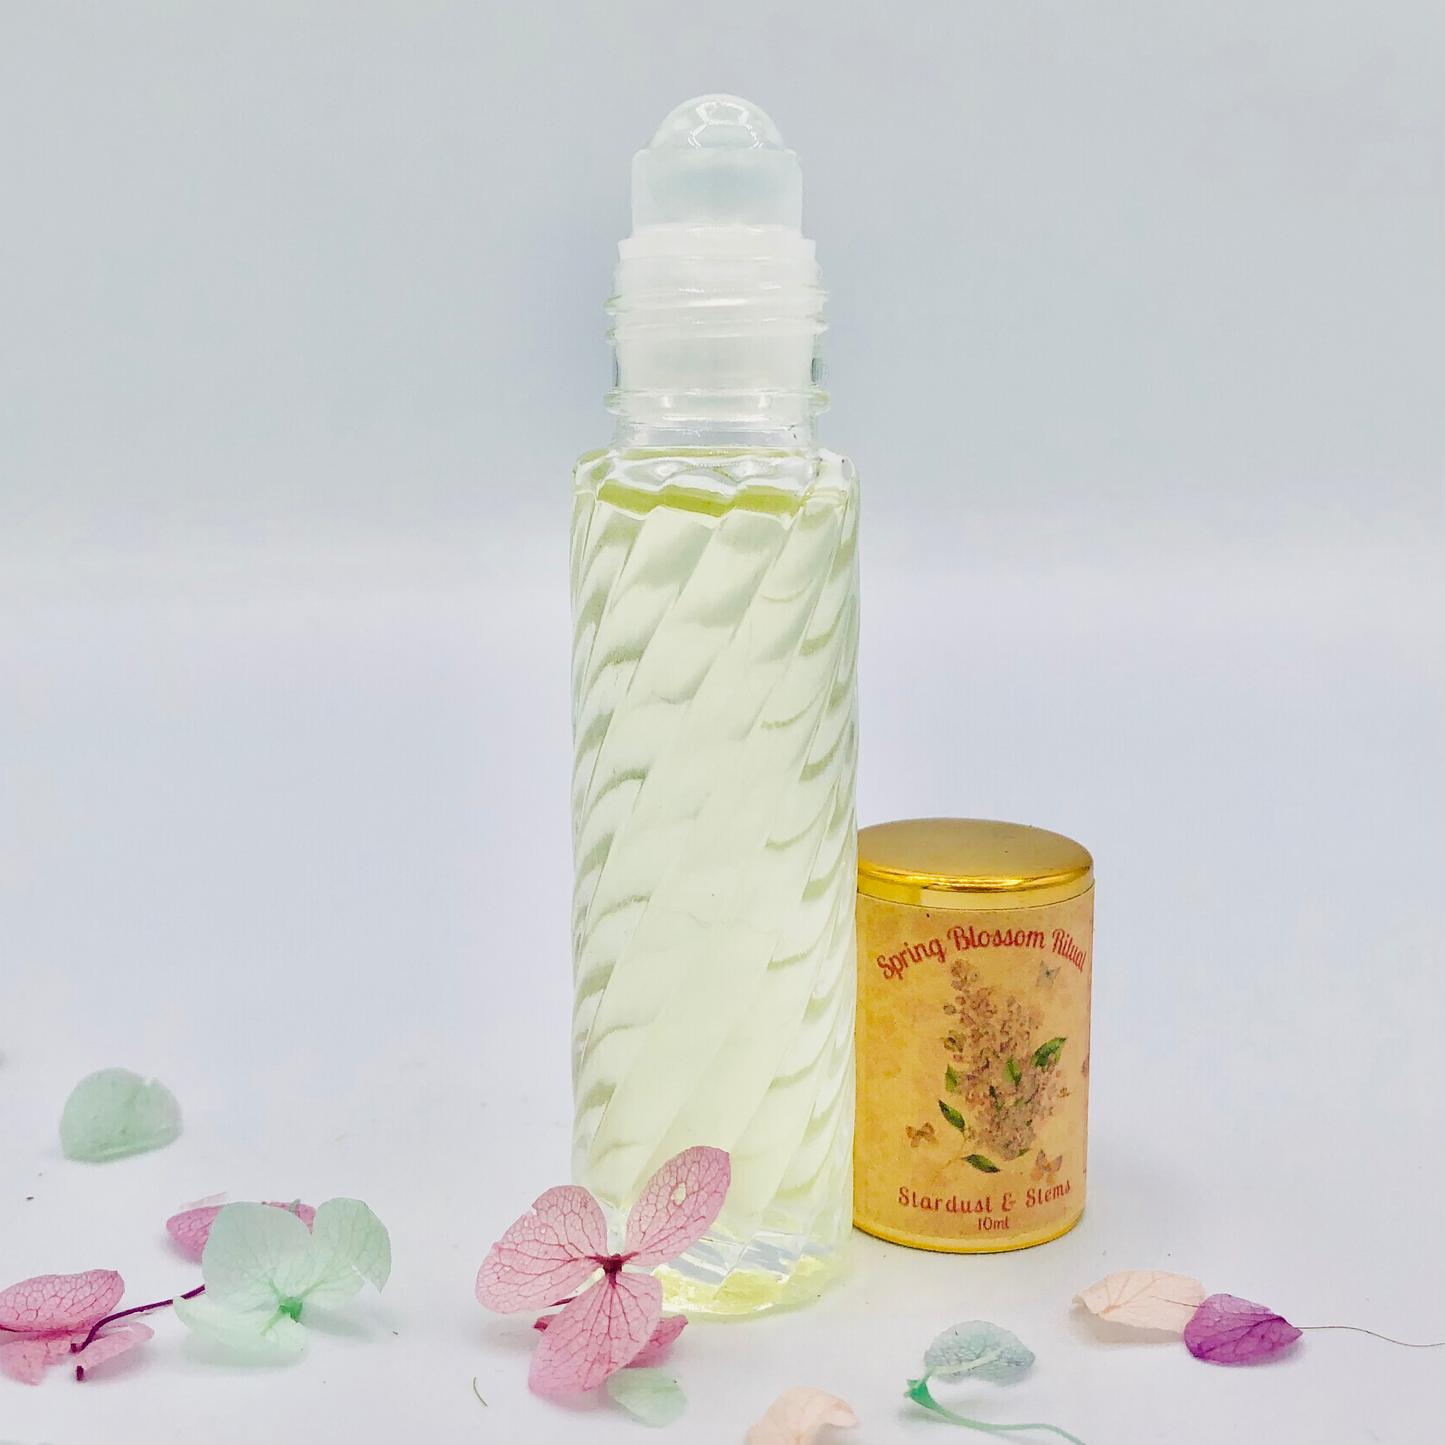 Lilac & Honeysuckle Perfume SPRING BLOSSOM RITUAL, Paraben Free Seasonal Essential Oil Indie Scent, Witchy Magick Fairycore Cottagecore Gift